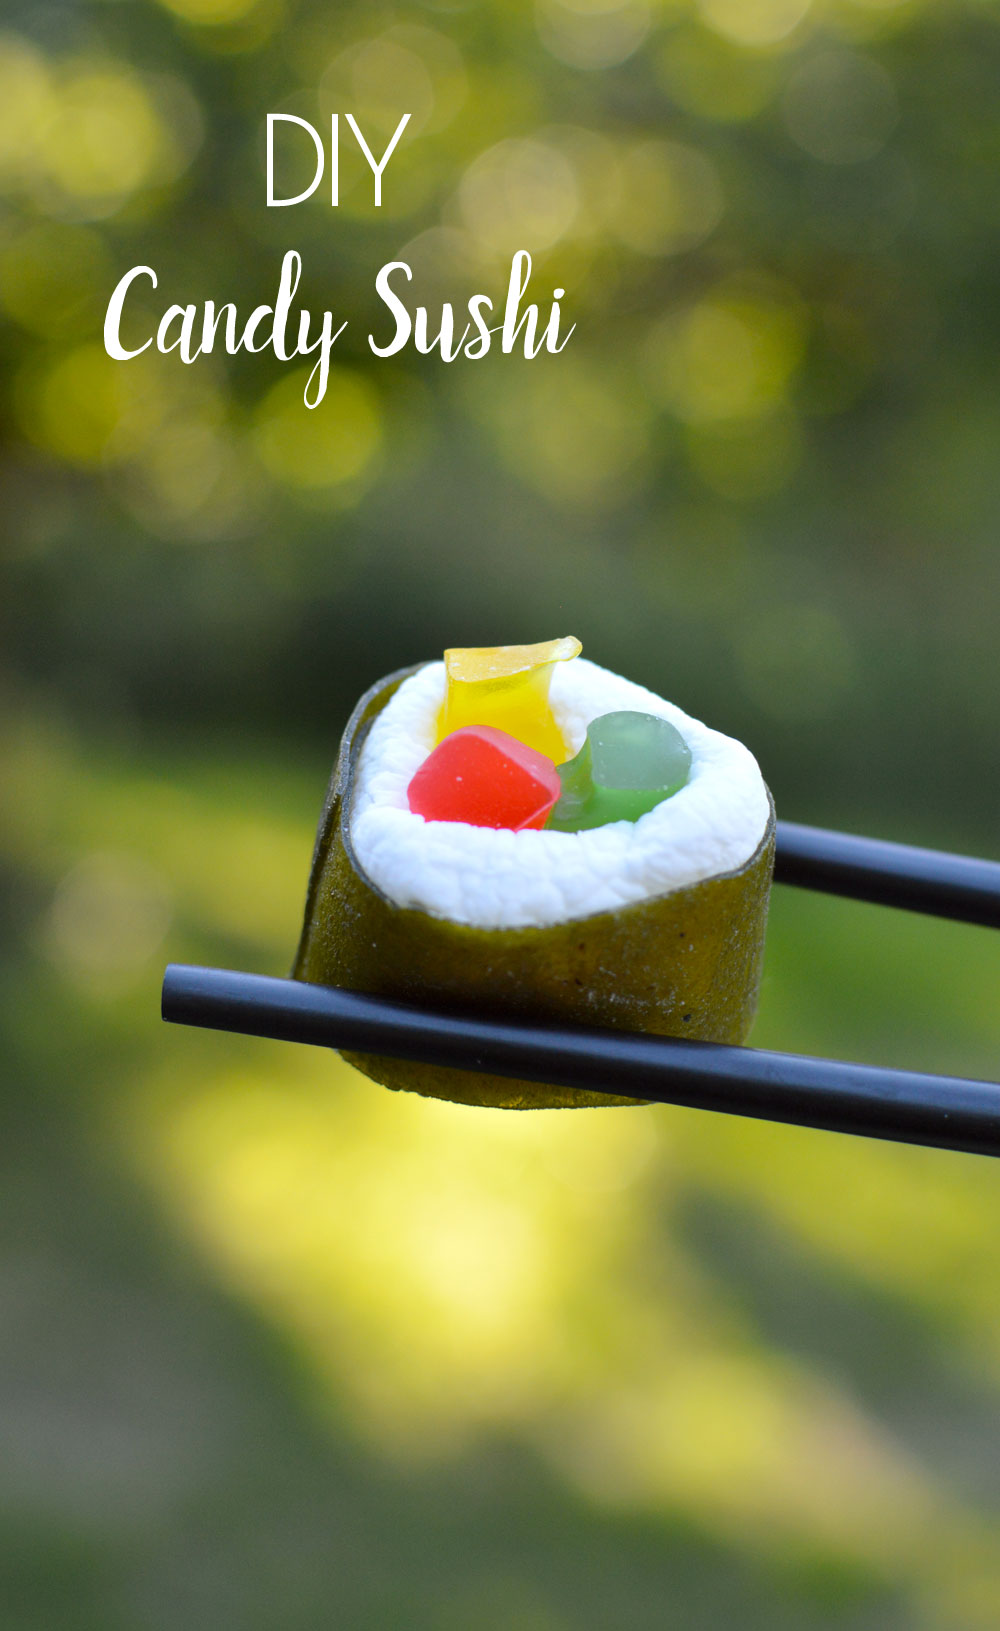 DIY Candy Sushi and fun party treats - Mommy Scene